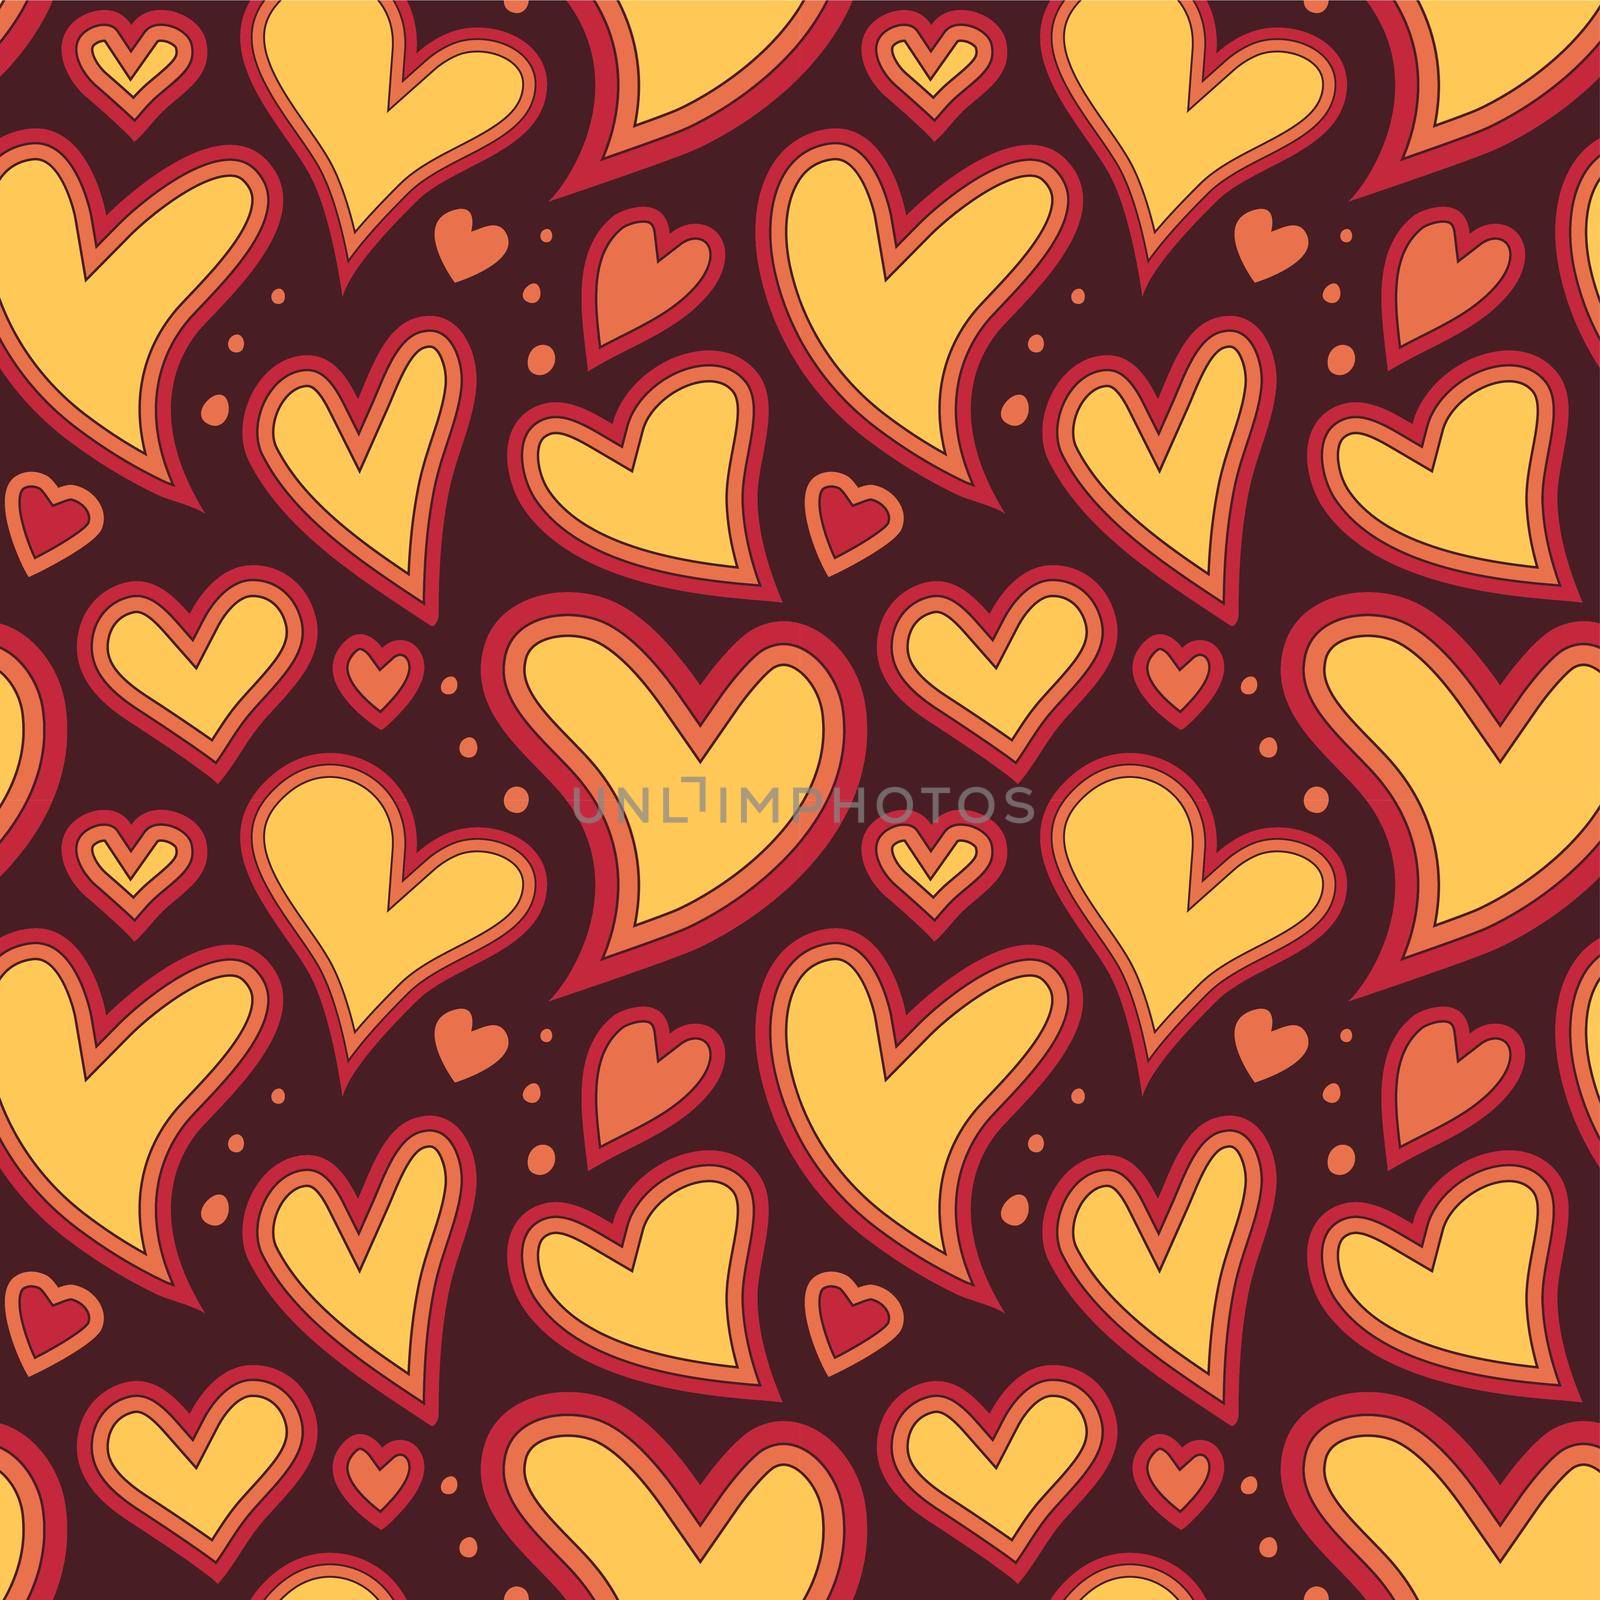 Groovy Hearts Seamless Background by apollocat